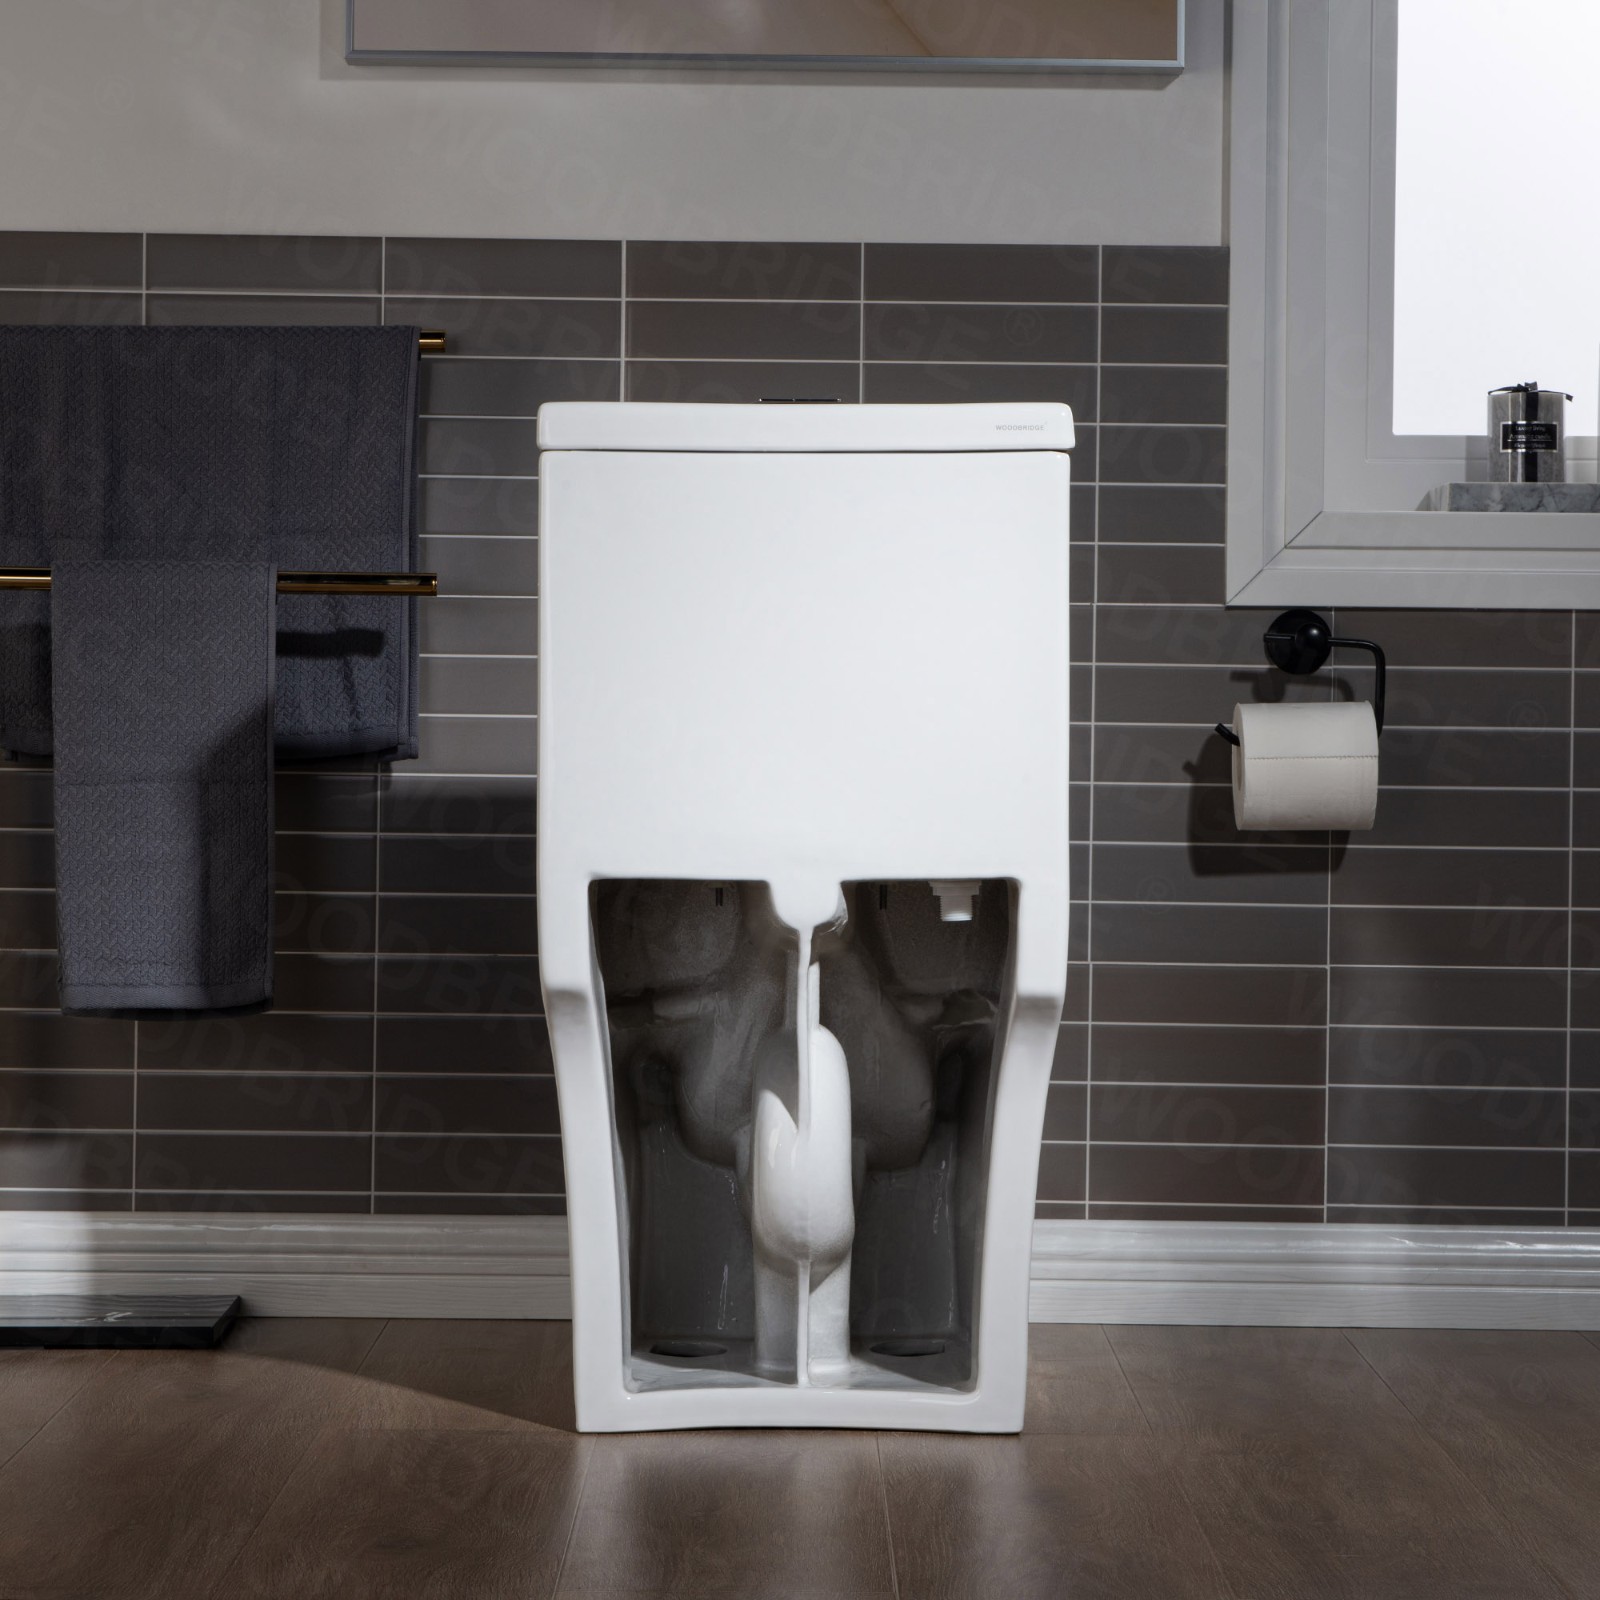  WOODBRIDGE One Piece Short Compact Bathroom Tiny Mini Commode Water Closet Dual Flush Concealed Trapway, Matte Black Button B0500-MB, White_7622